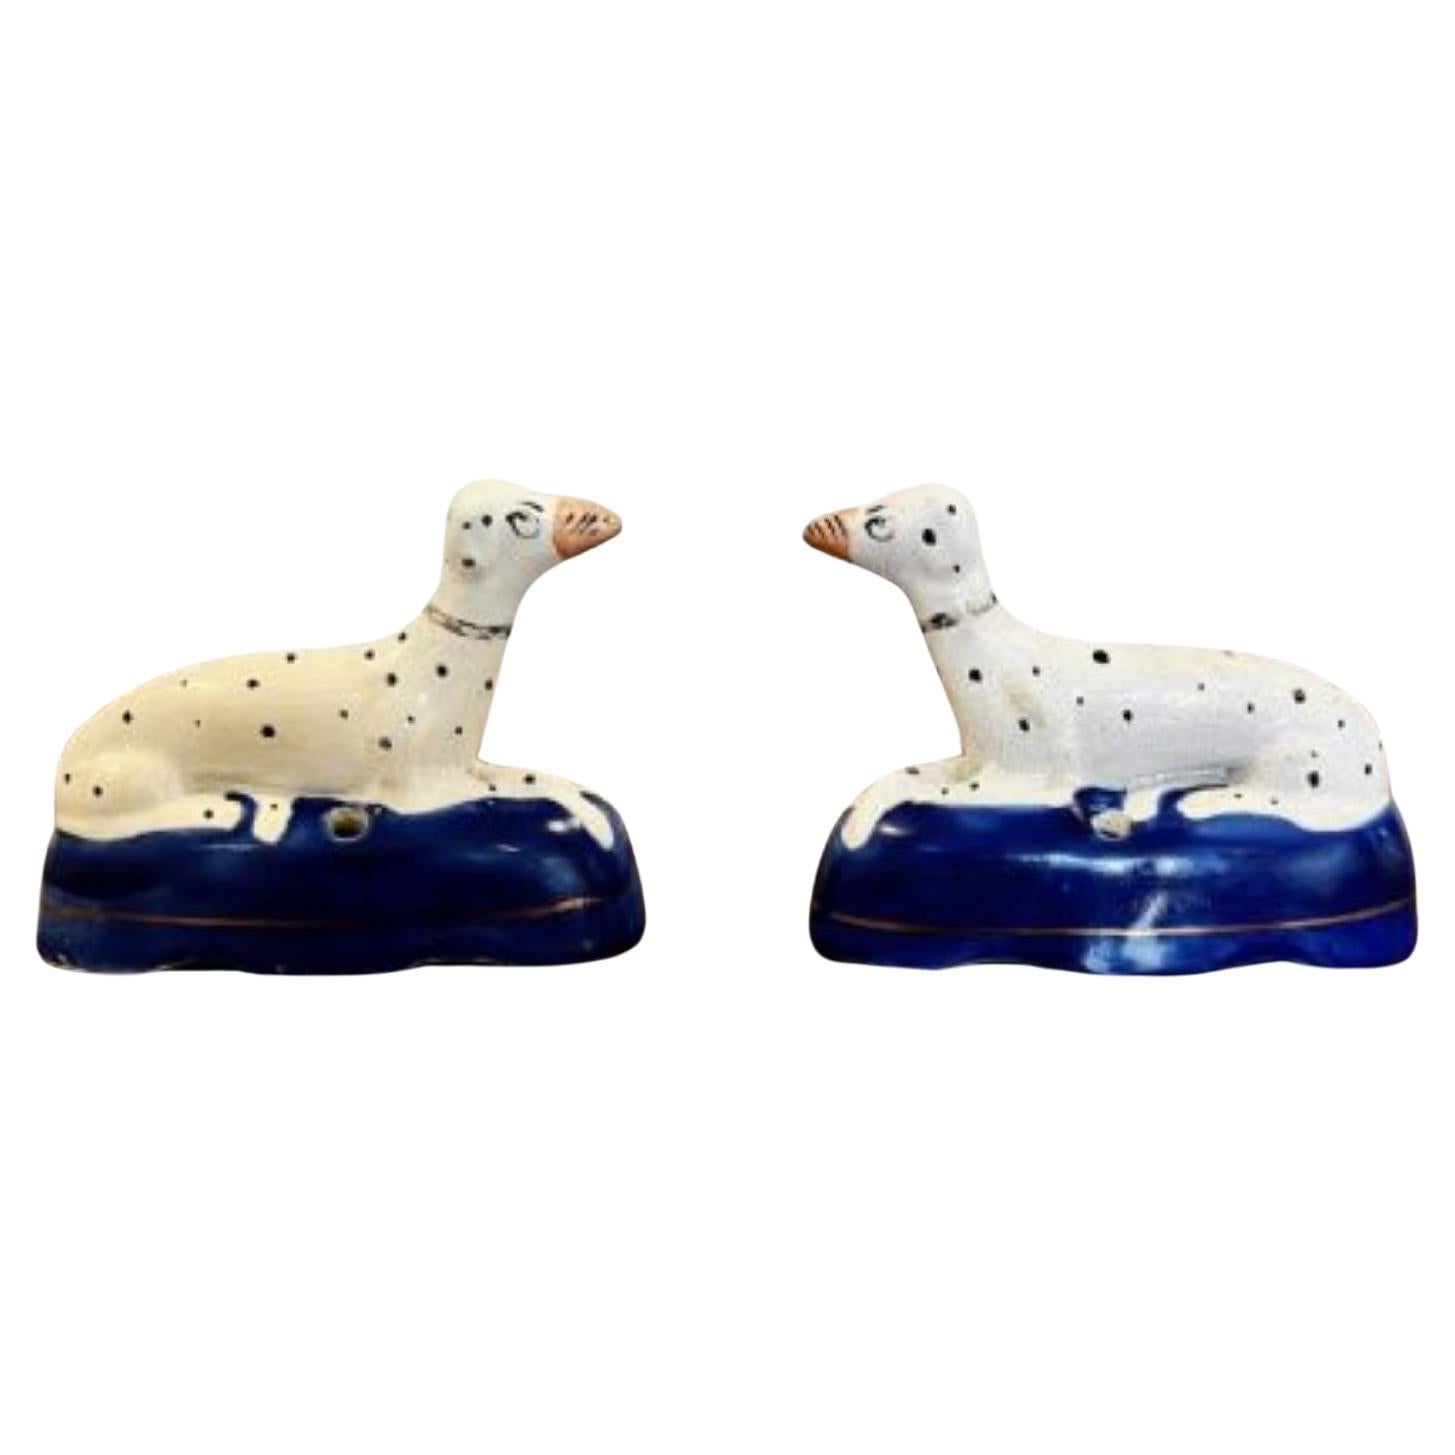 Quality pair of antique Victorian Staffordshire Dalmatian inkwells For Sale